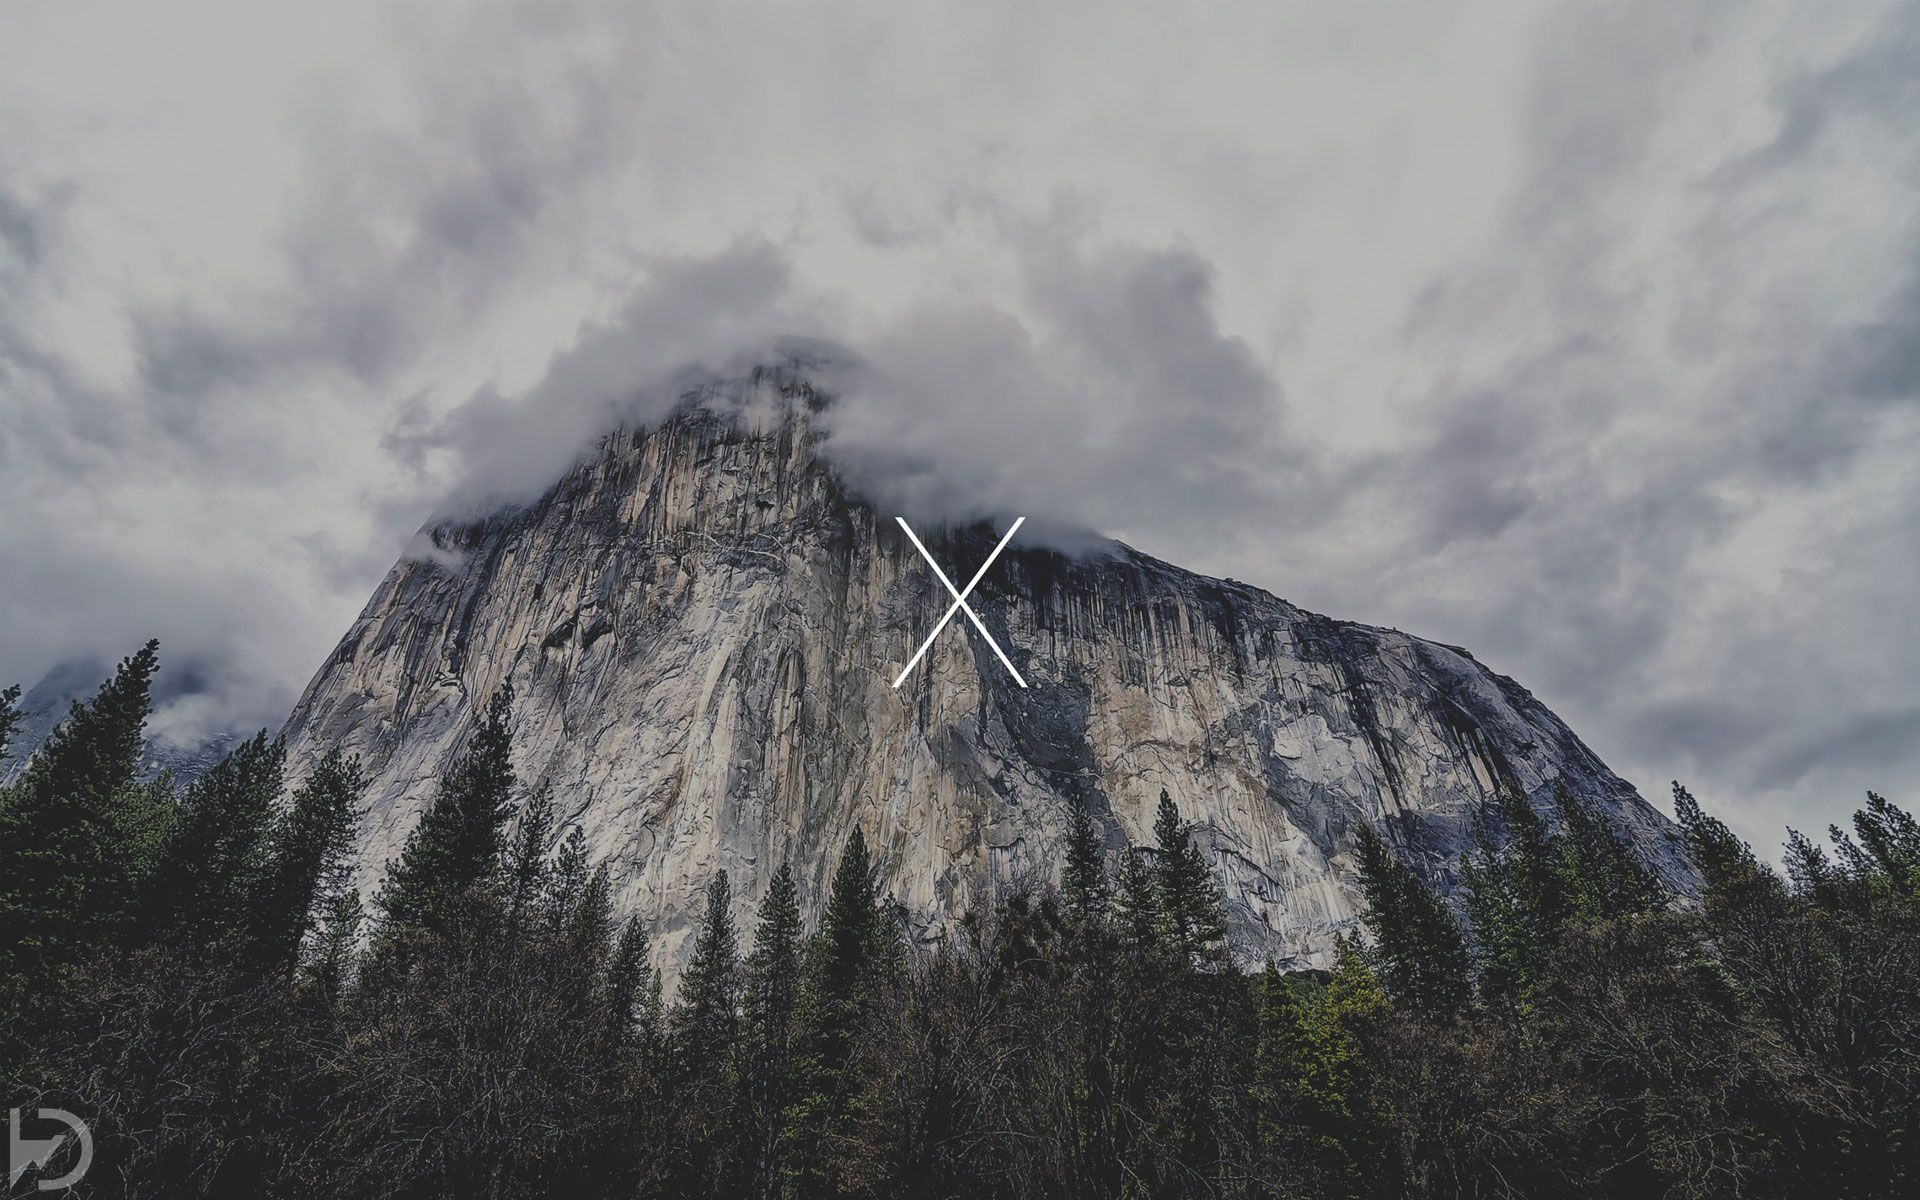 1920x1200 Official os x yosemite hd wallpapers free download | Yosemite, Yosemite wallpaper, California yosemite national park